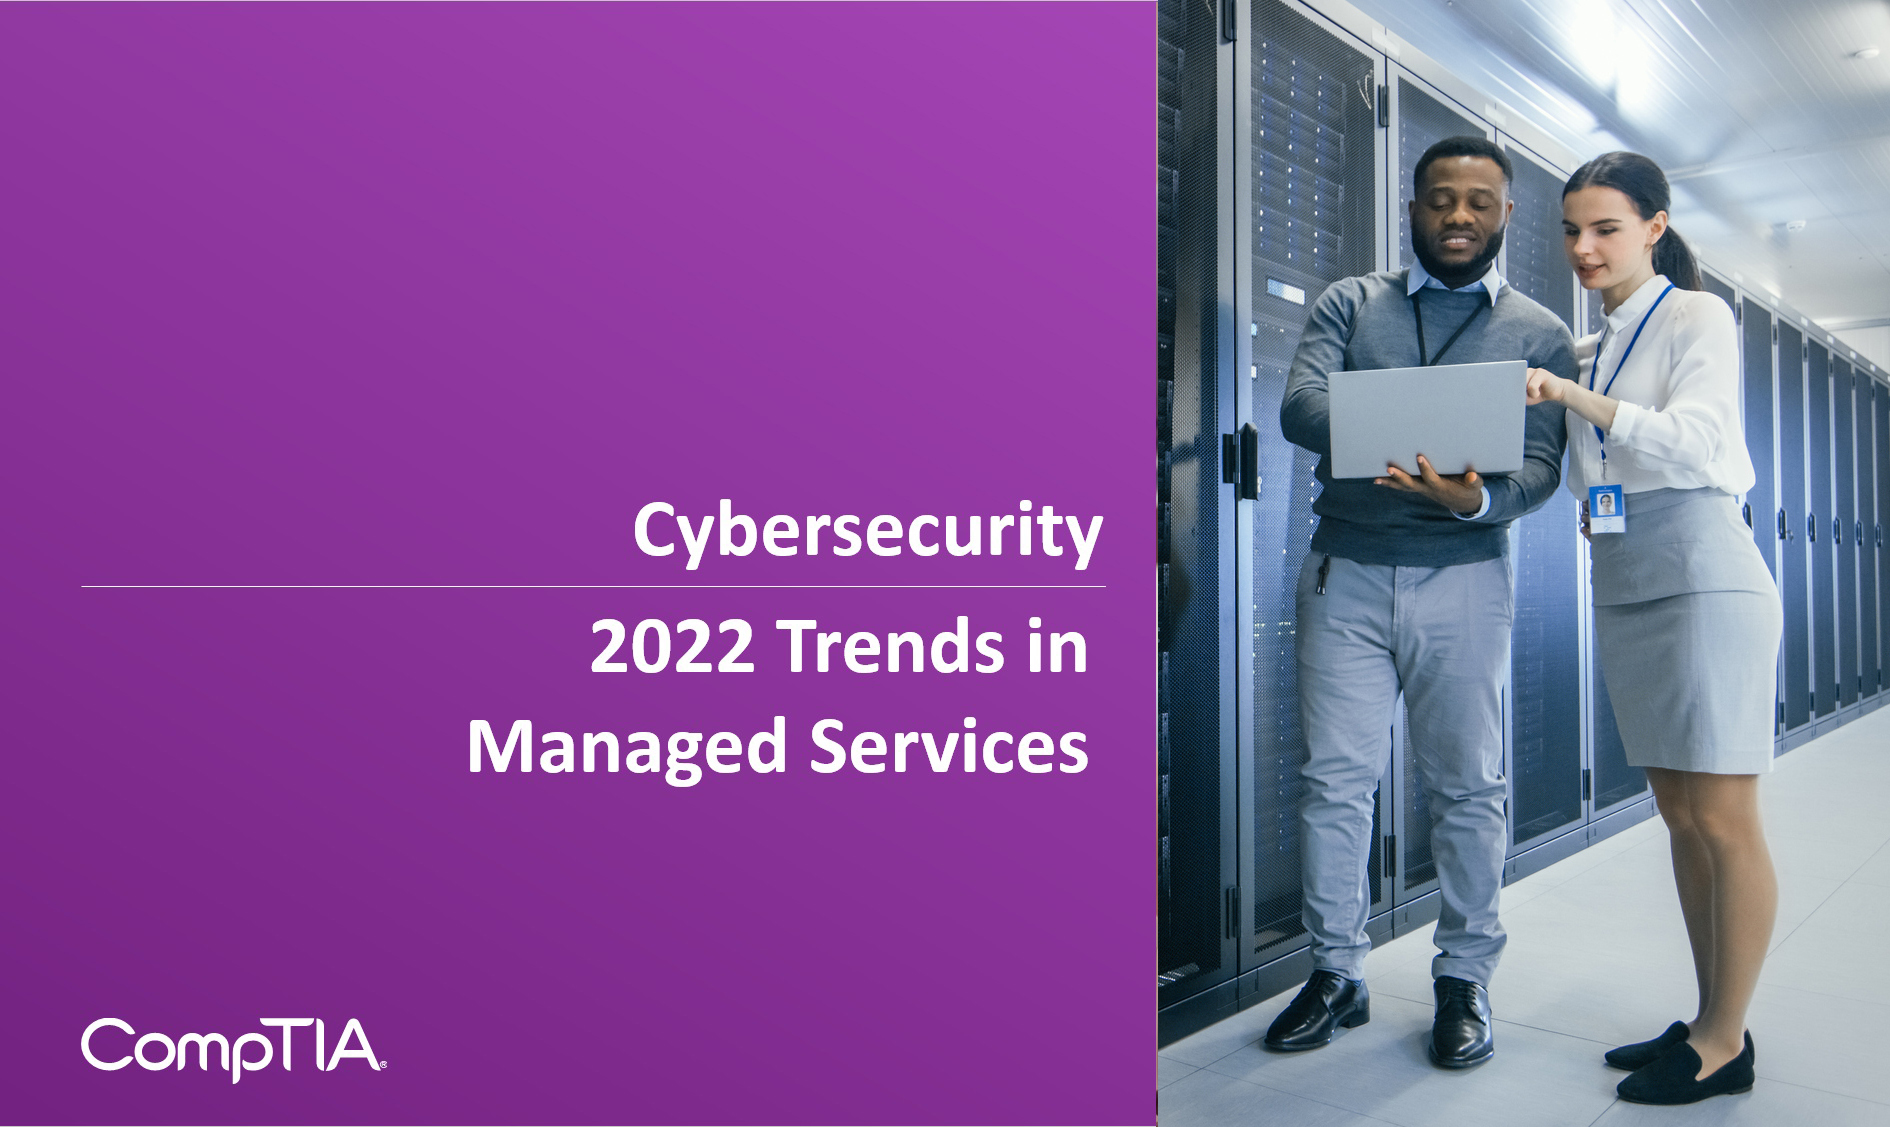 2022 Trends in Managed Services Cybersecurity Cover_purple